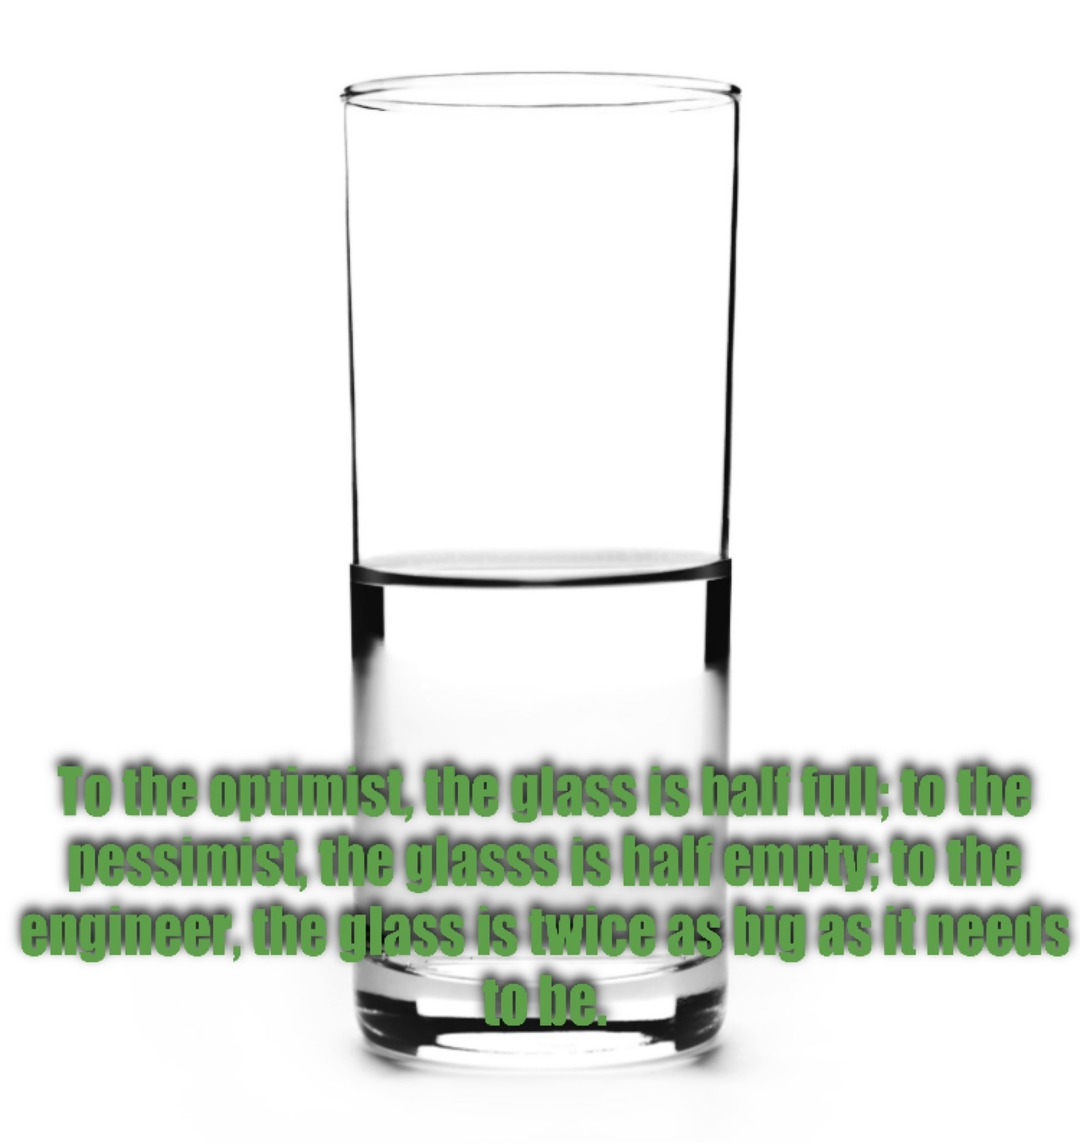 An engineer would spend all day trying to figure out ways to fill it up from the bottom rather than the top. - meme